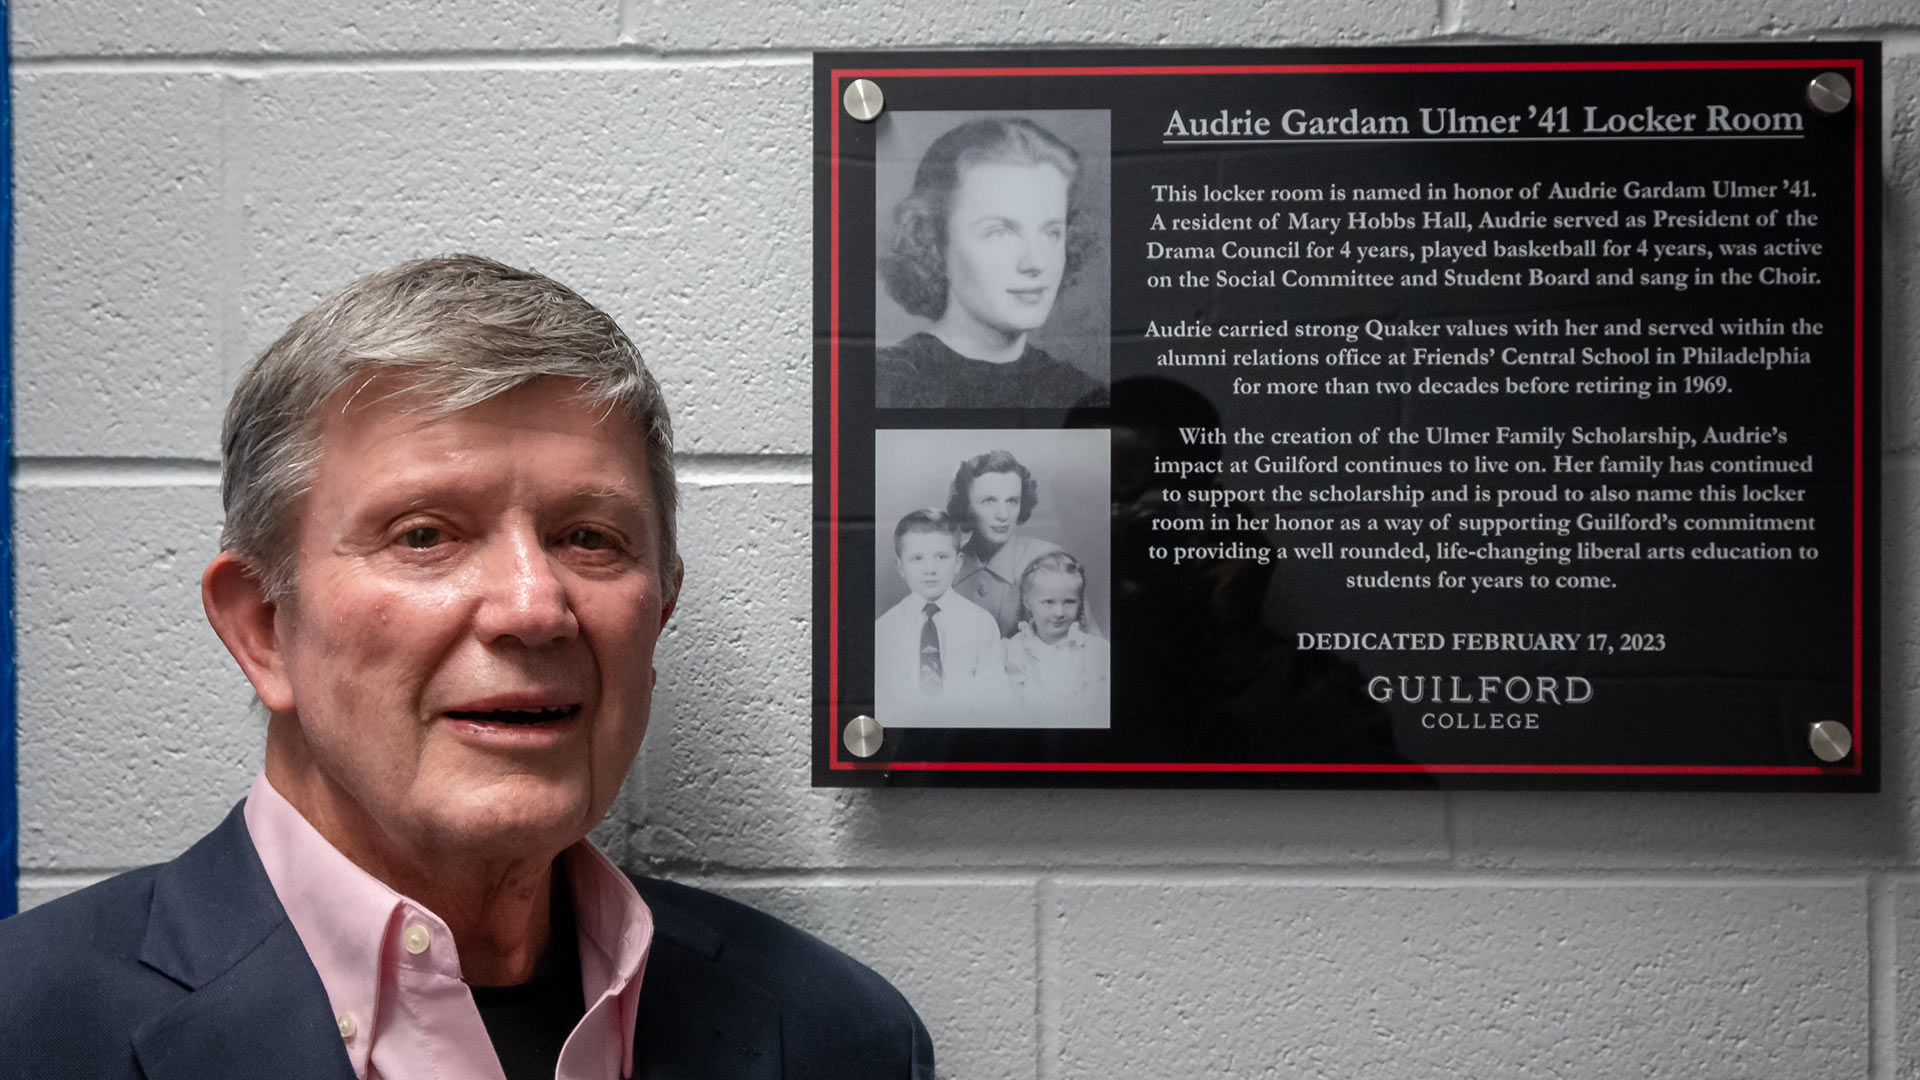 Rich Ulmer with the sign recognizing the naming of the women’s basketball locker room for his mother, Audrie Gardam Ulmer ‘41.